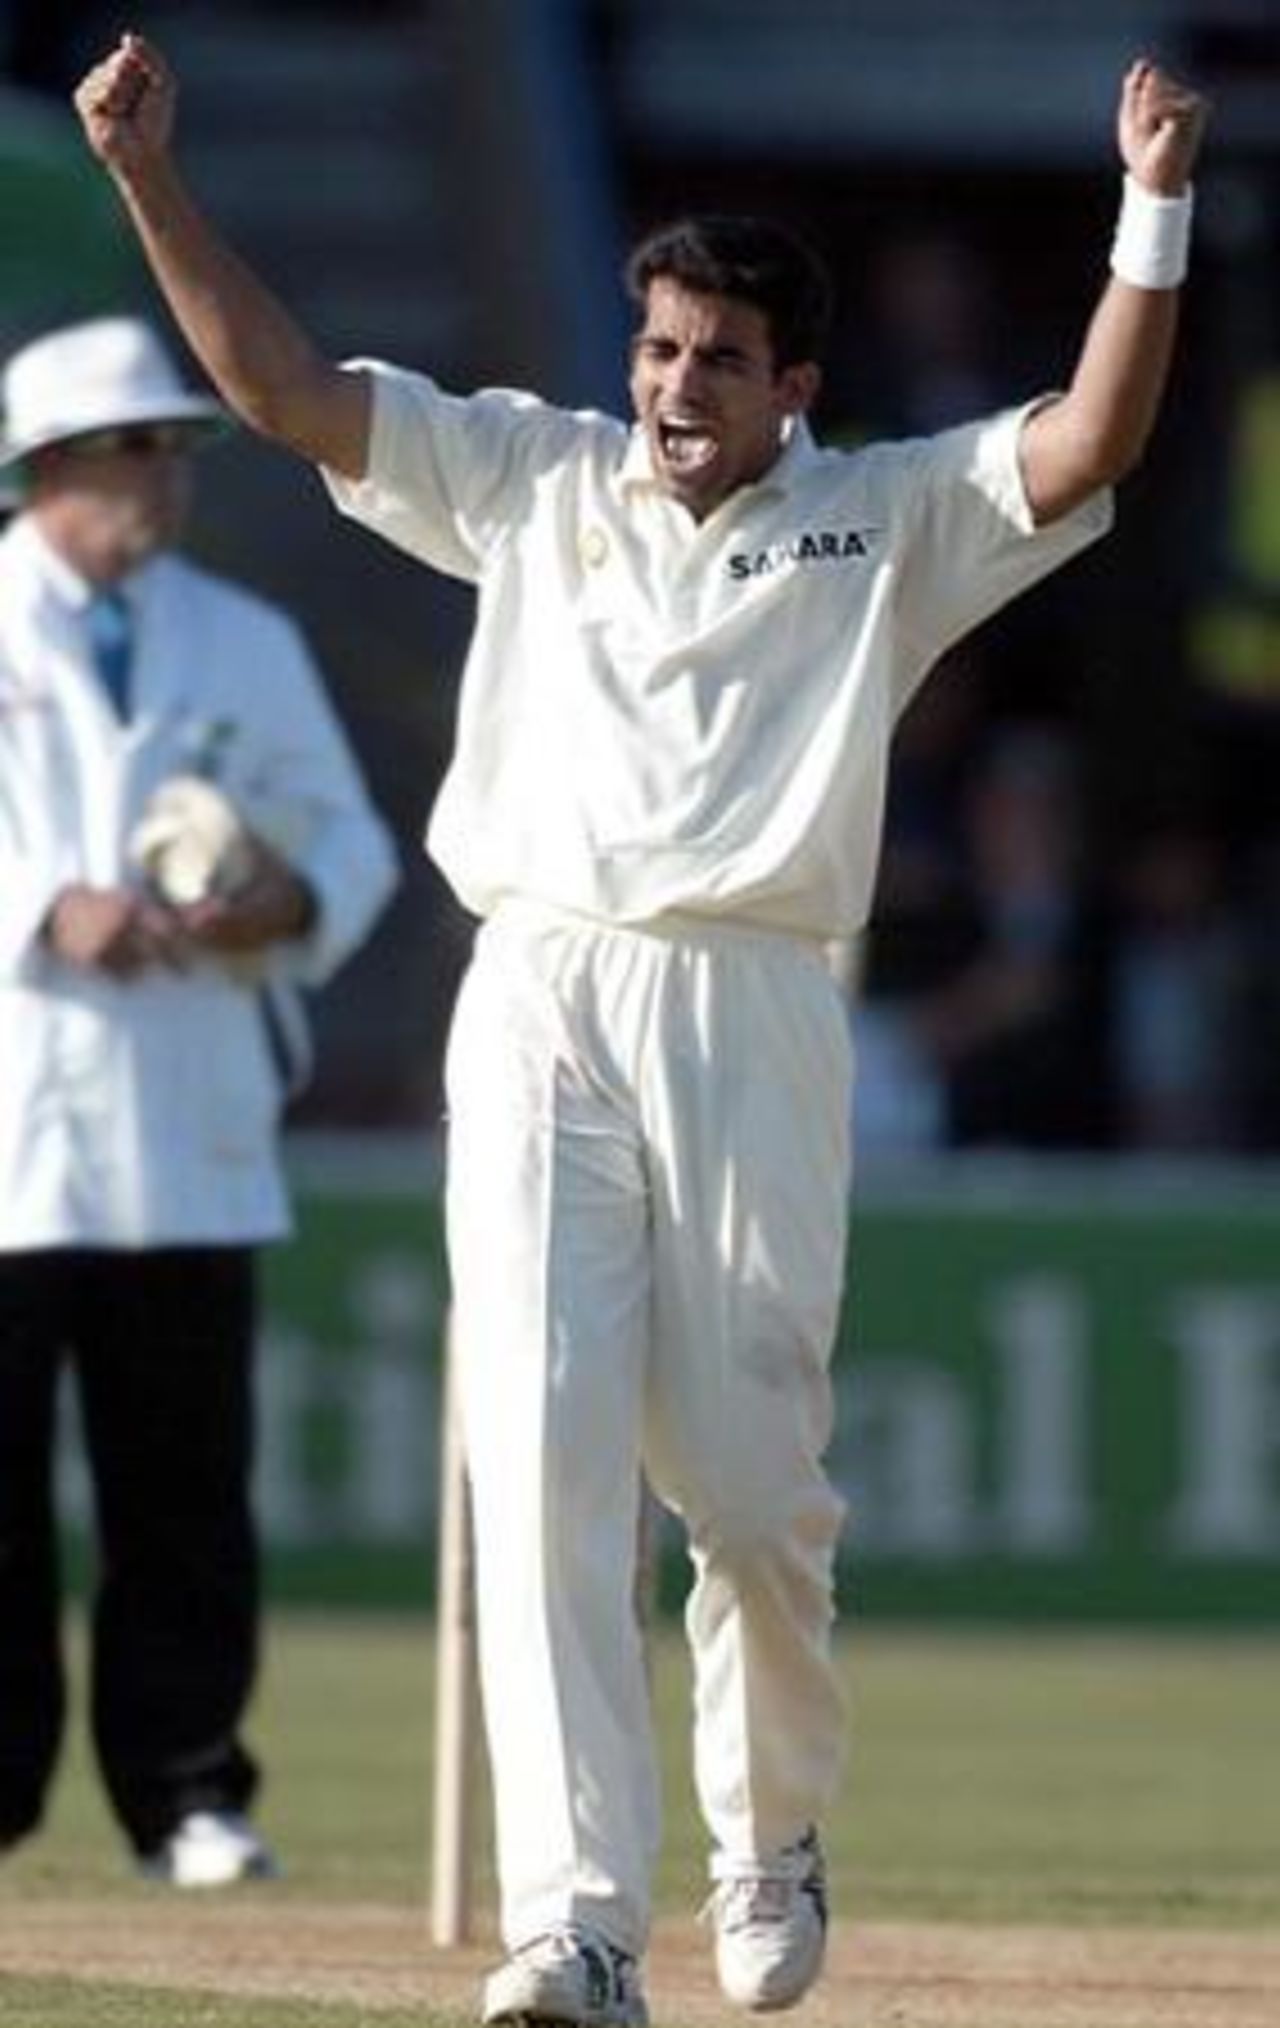 Indian bowler Zaheer Khan celebrates the dismissal of New Zealand batsman Nathan Astle, caught by Harbhajan Singh for 41 in his first innings. 1st Test: New Zealand v India at Basin Reserve, Wellington, 12-16 December 2002 (13 December 2002).